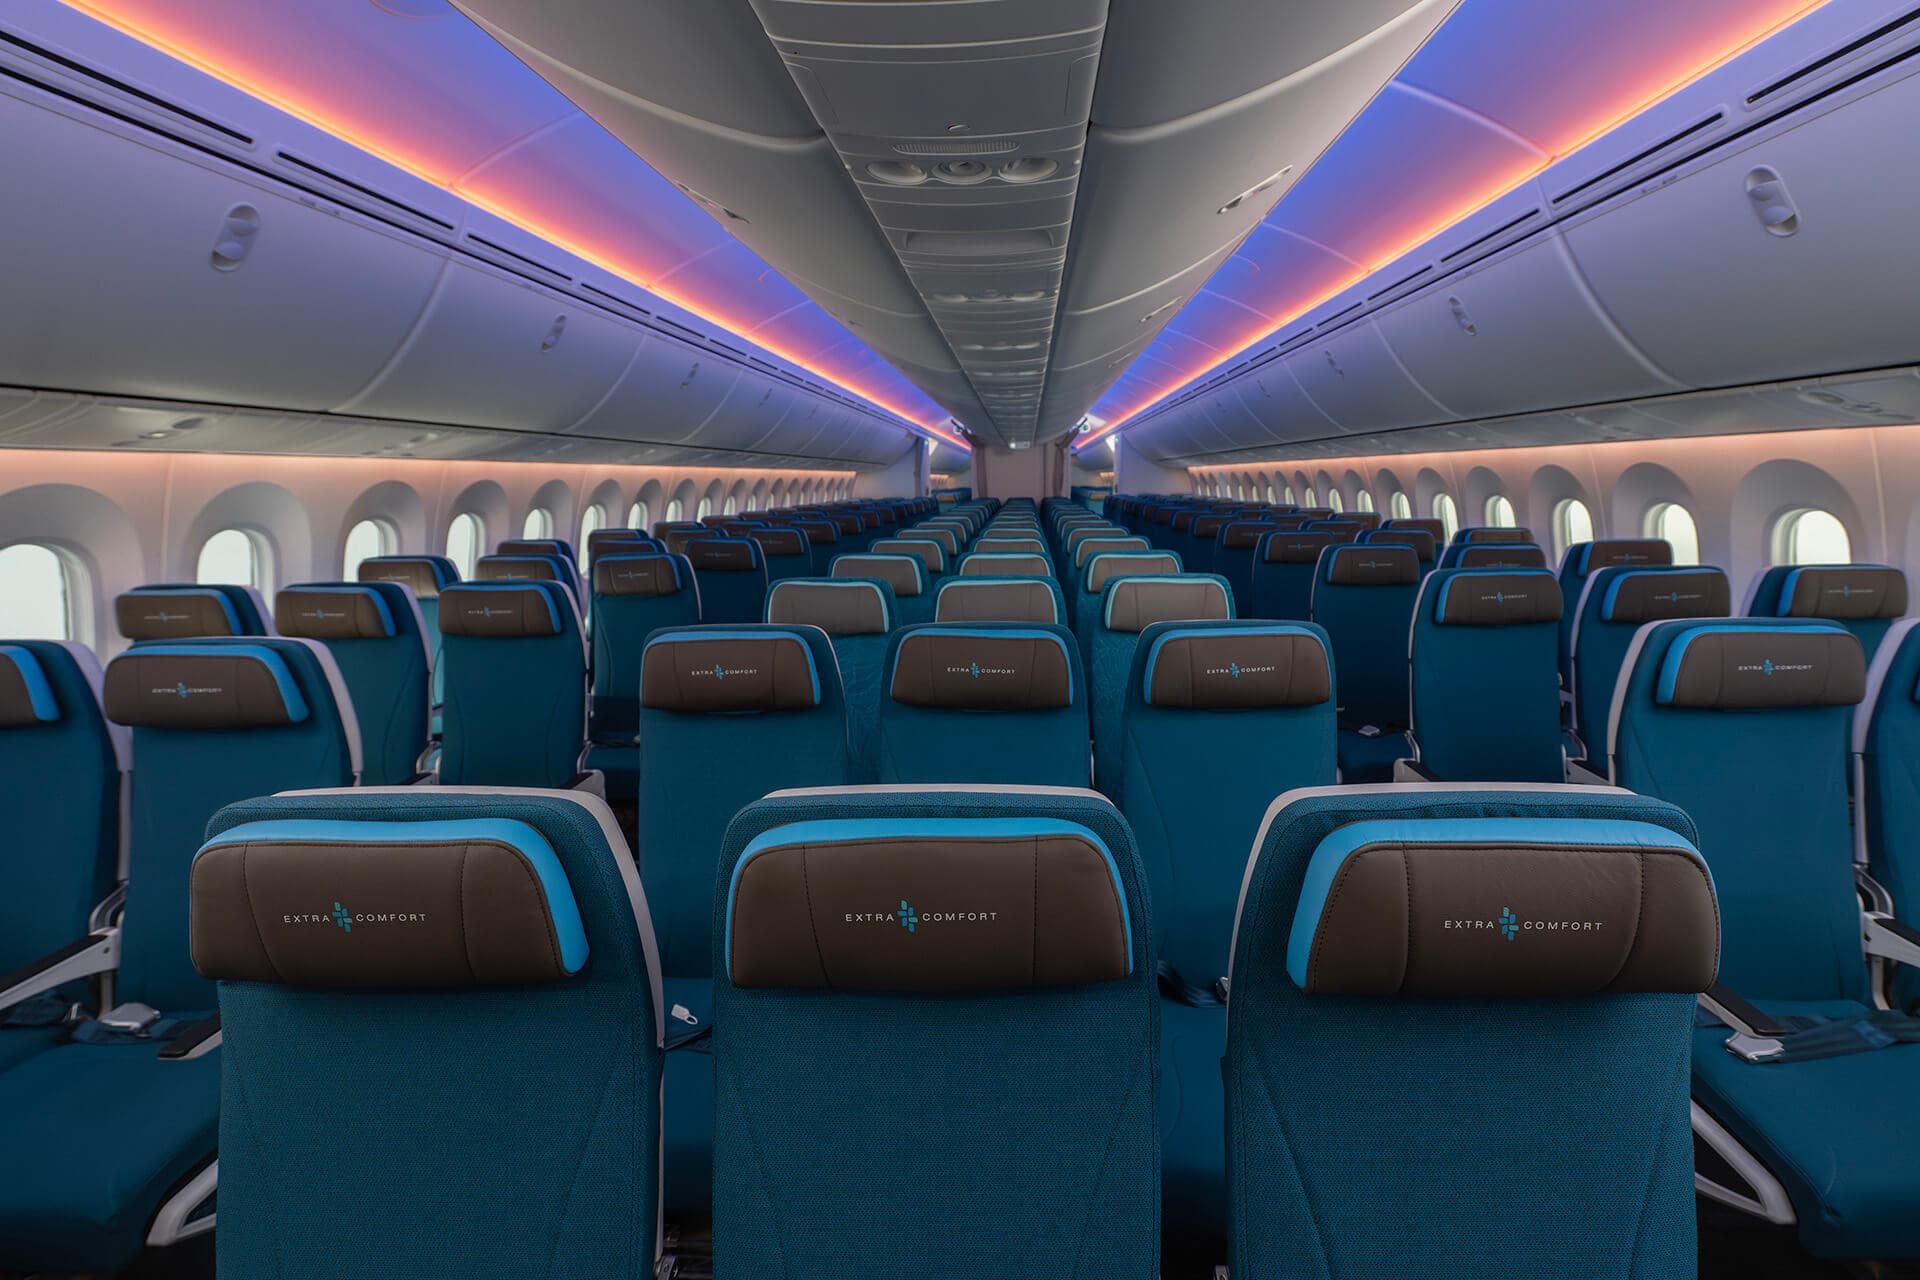 Hawaiian Airlines 787 Extra Comfort Class with blue seating fabric and pink and purple cabin ceiling lighting